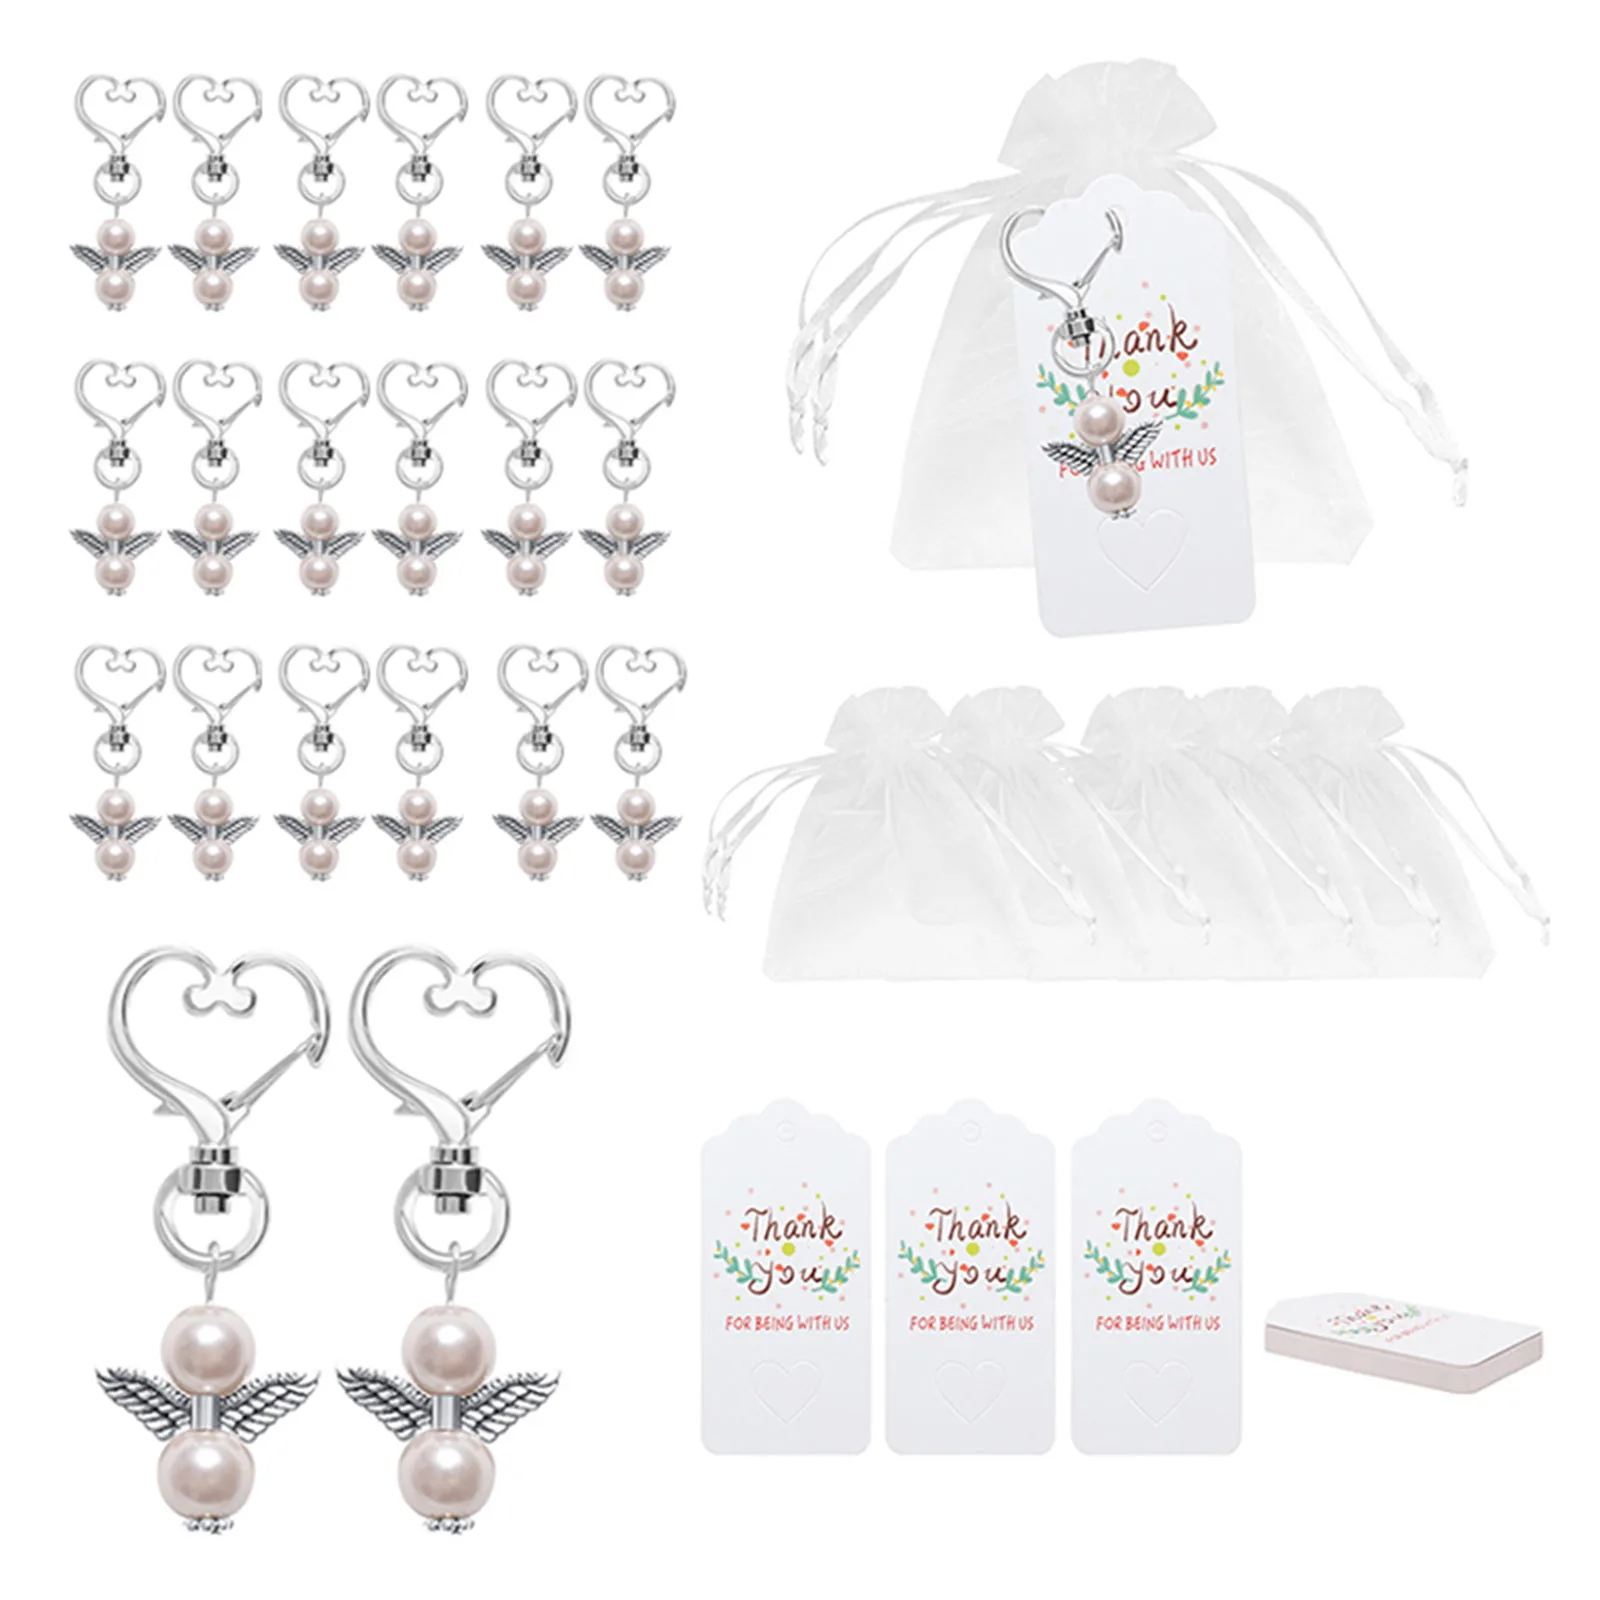 60 Pcs Thank You Favors Angel Keychain Favor Bow Angel Wing Thank You Tag Guest Return Favor for Baby xqmg Party Favors Event